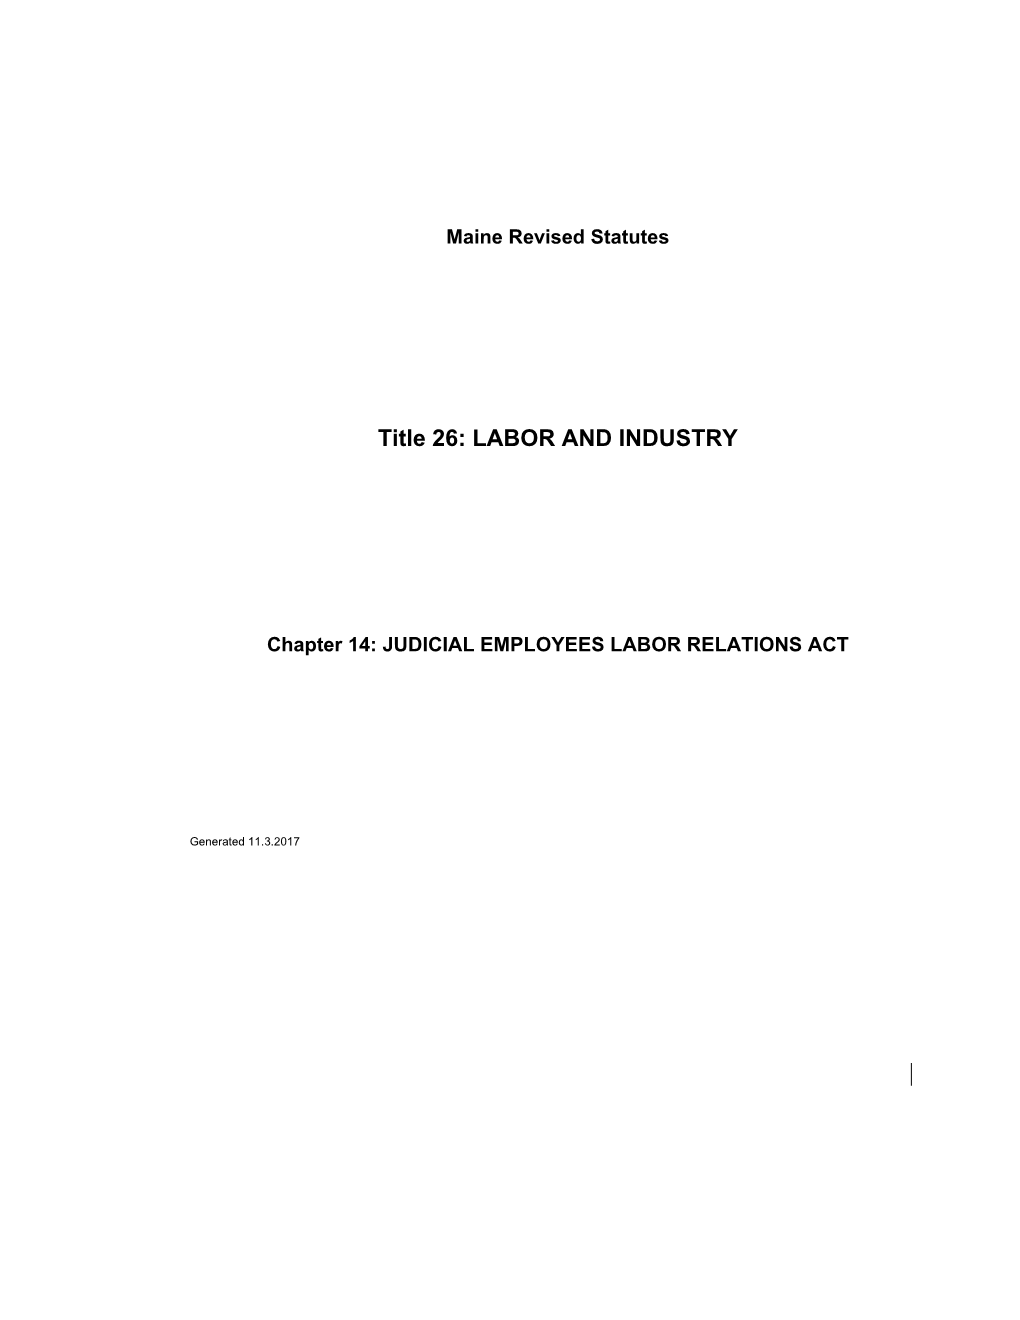 Title 26: LABOR and INDUSTRY s2